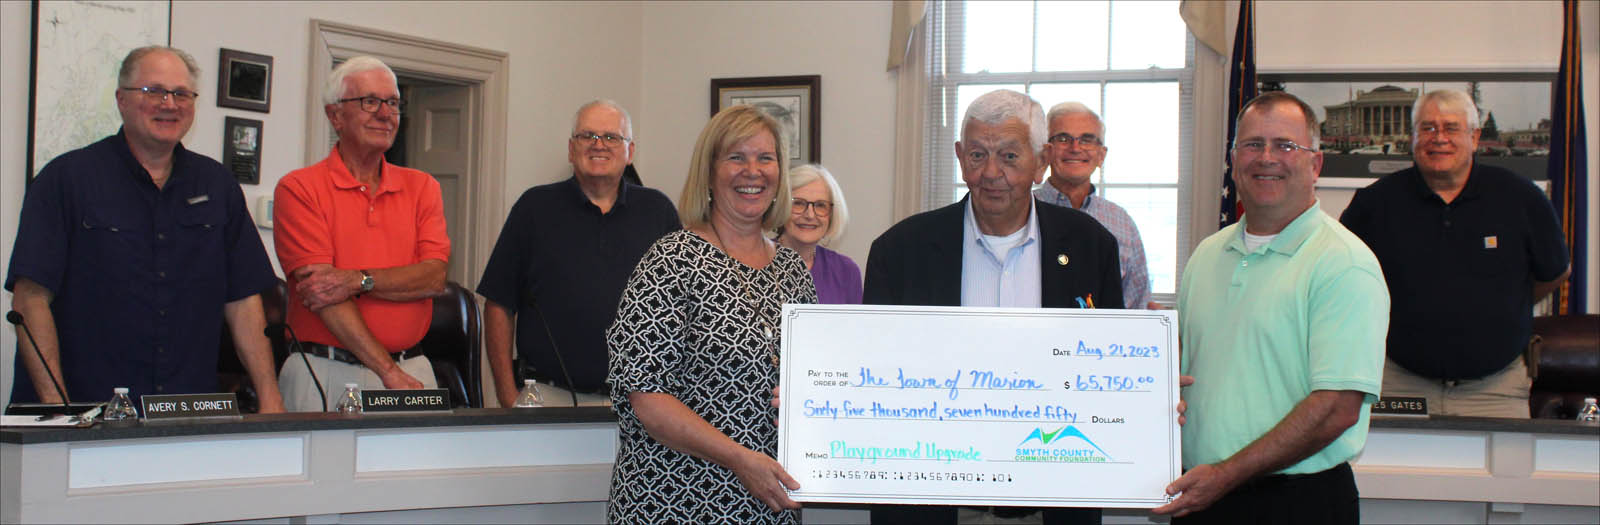 Linda Helton and Mike Robinson with the Smyth County Community Foundation presented a matching grant to Mayor David Helms and the Marion Town Council for their project to upgrade Ogburn Park.